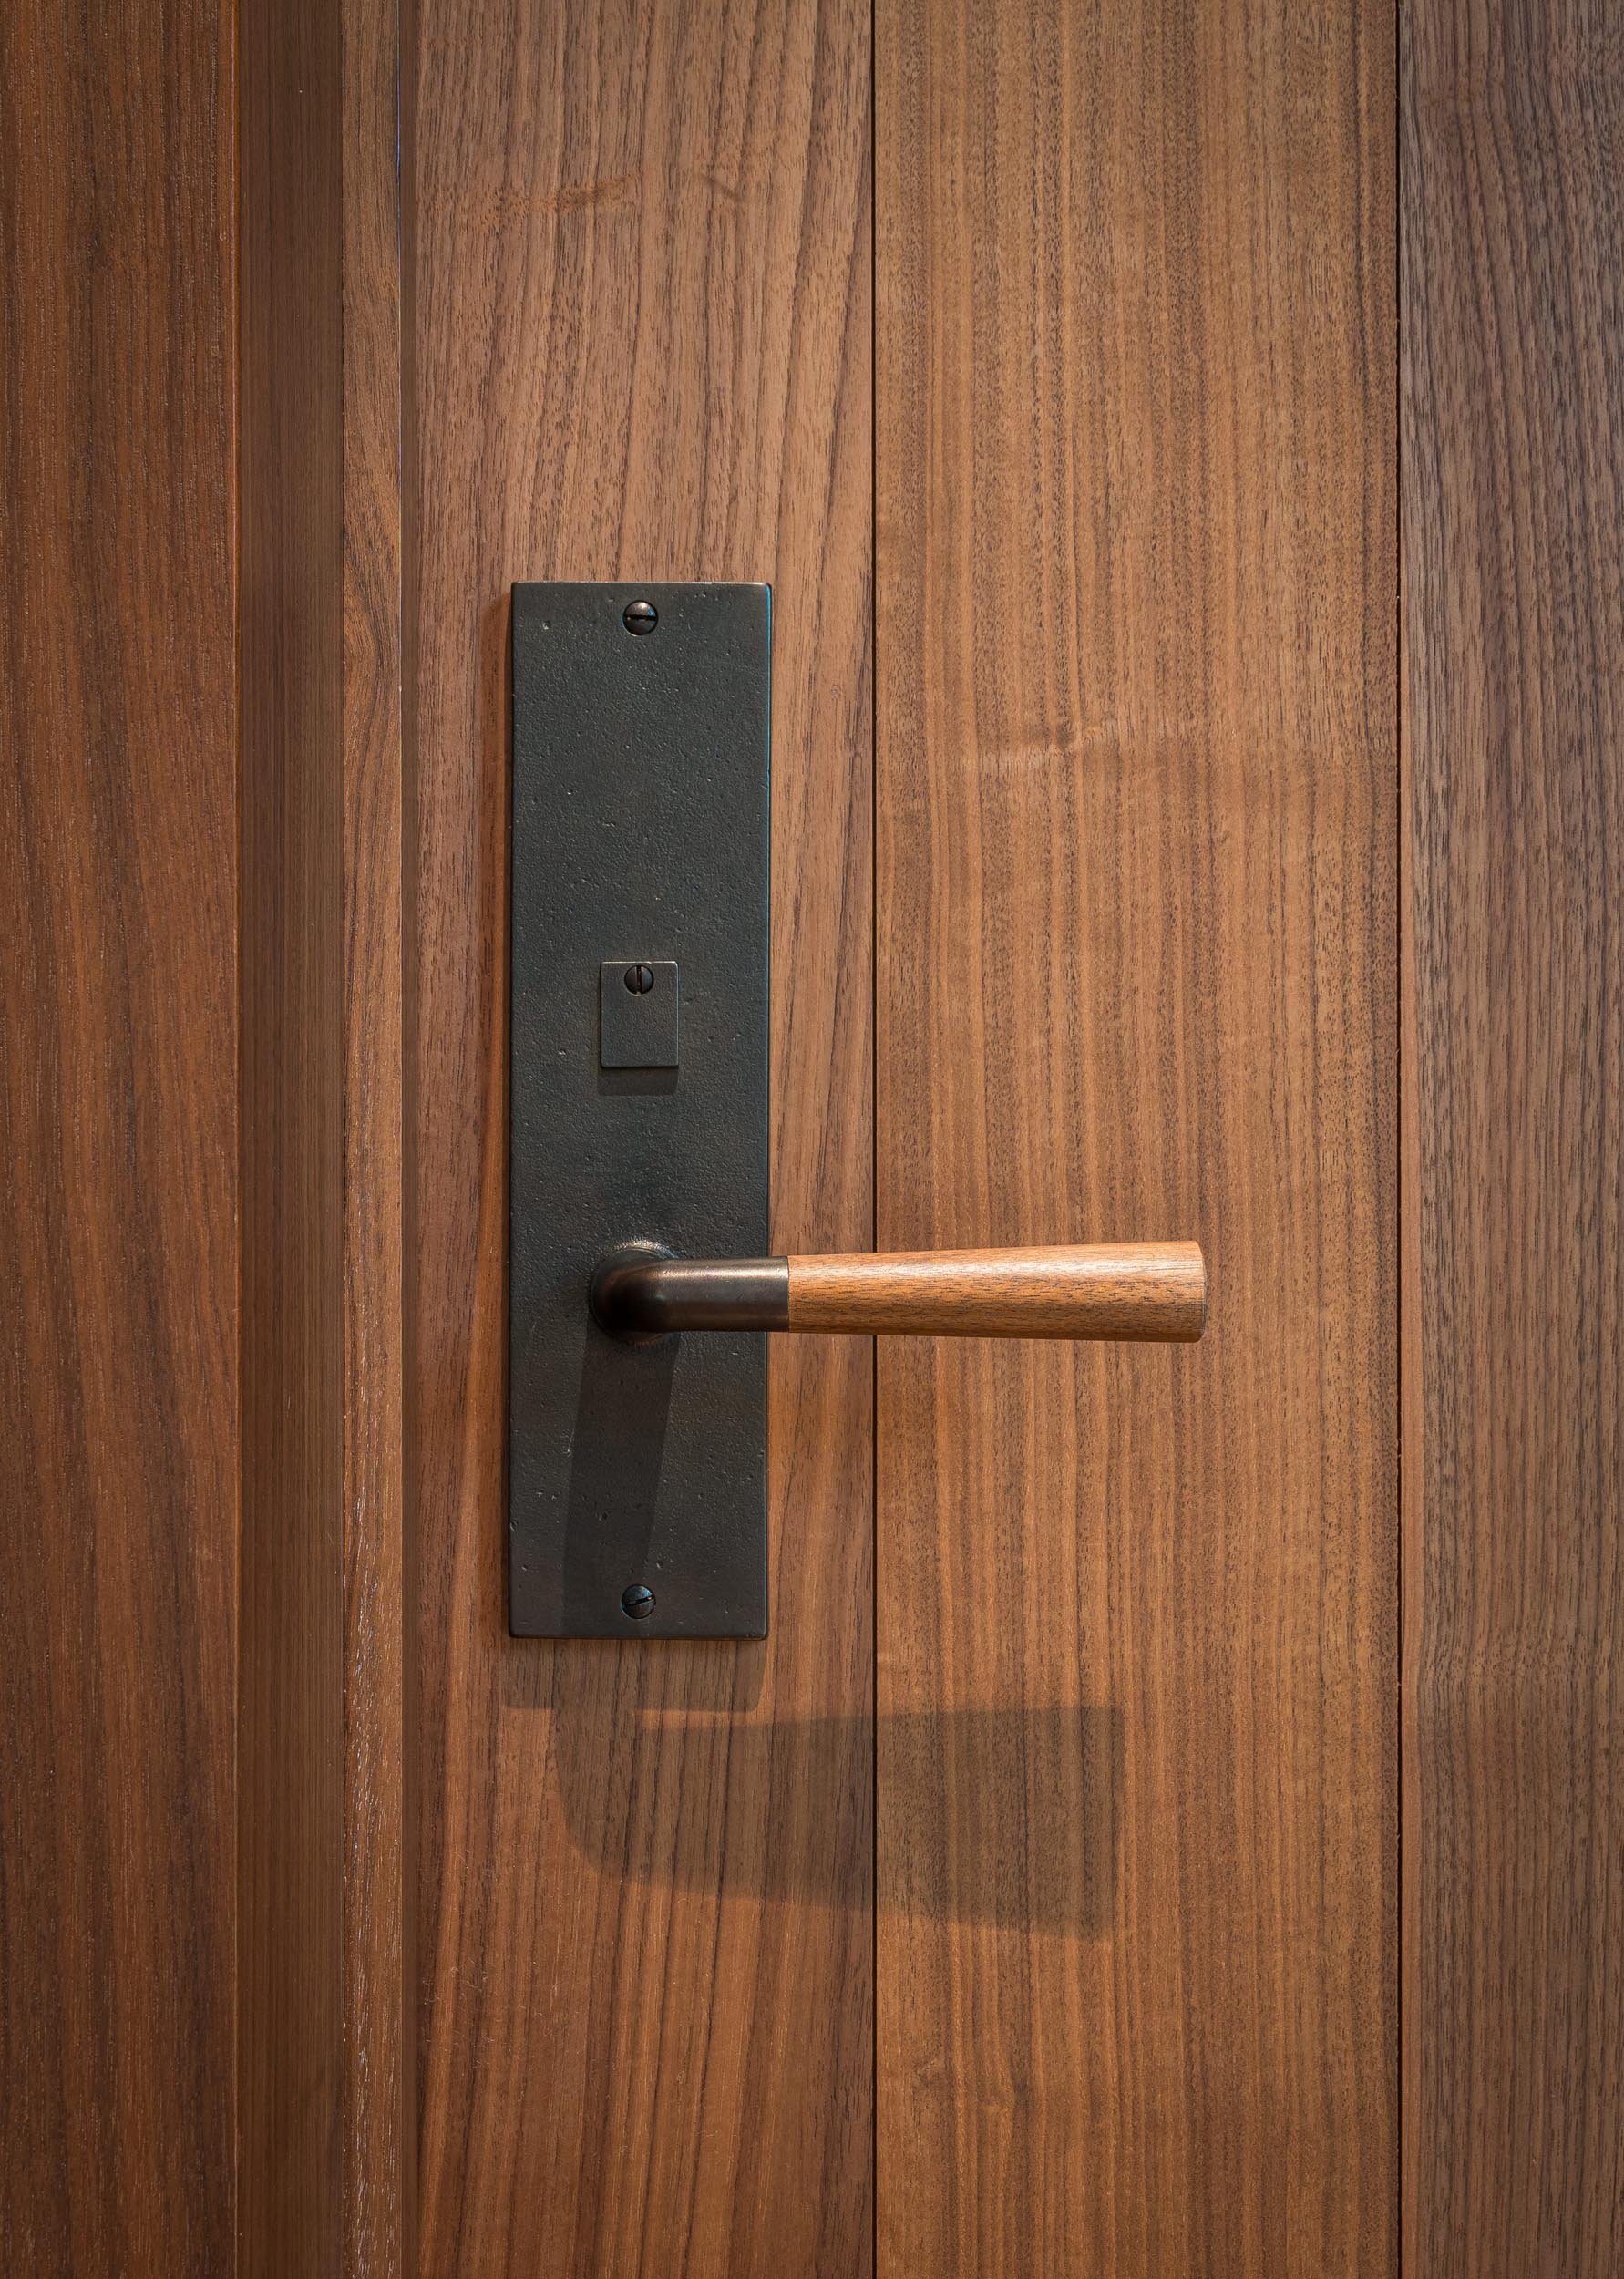  Project //  Tahoe Residence   L-W200 Lever   